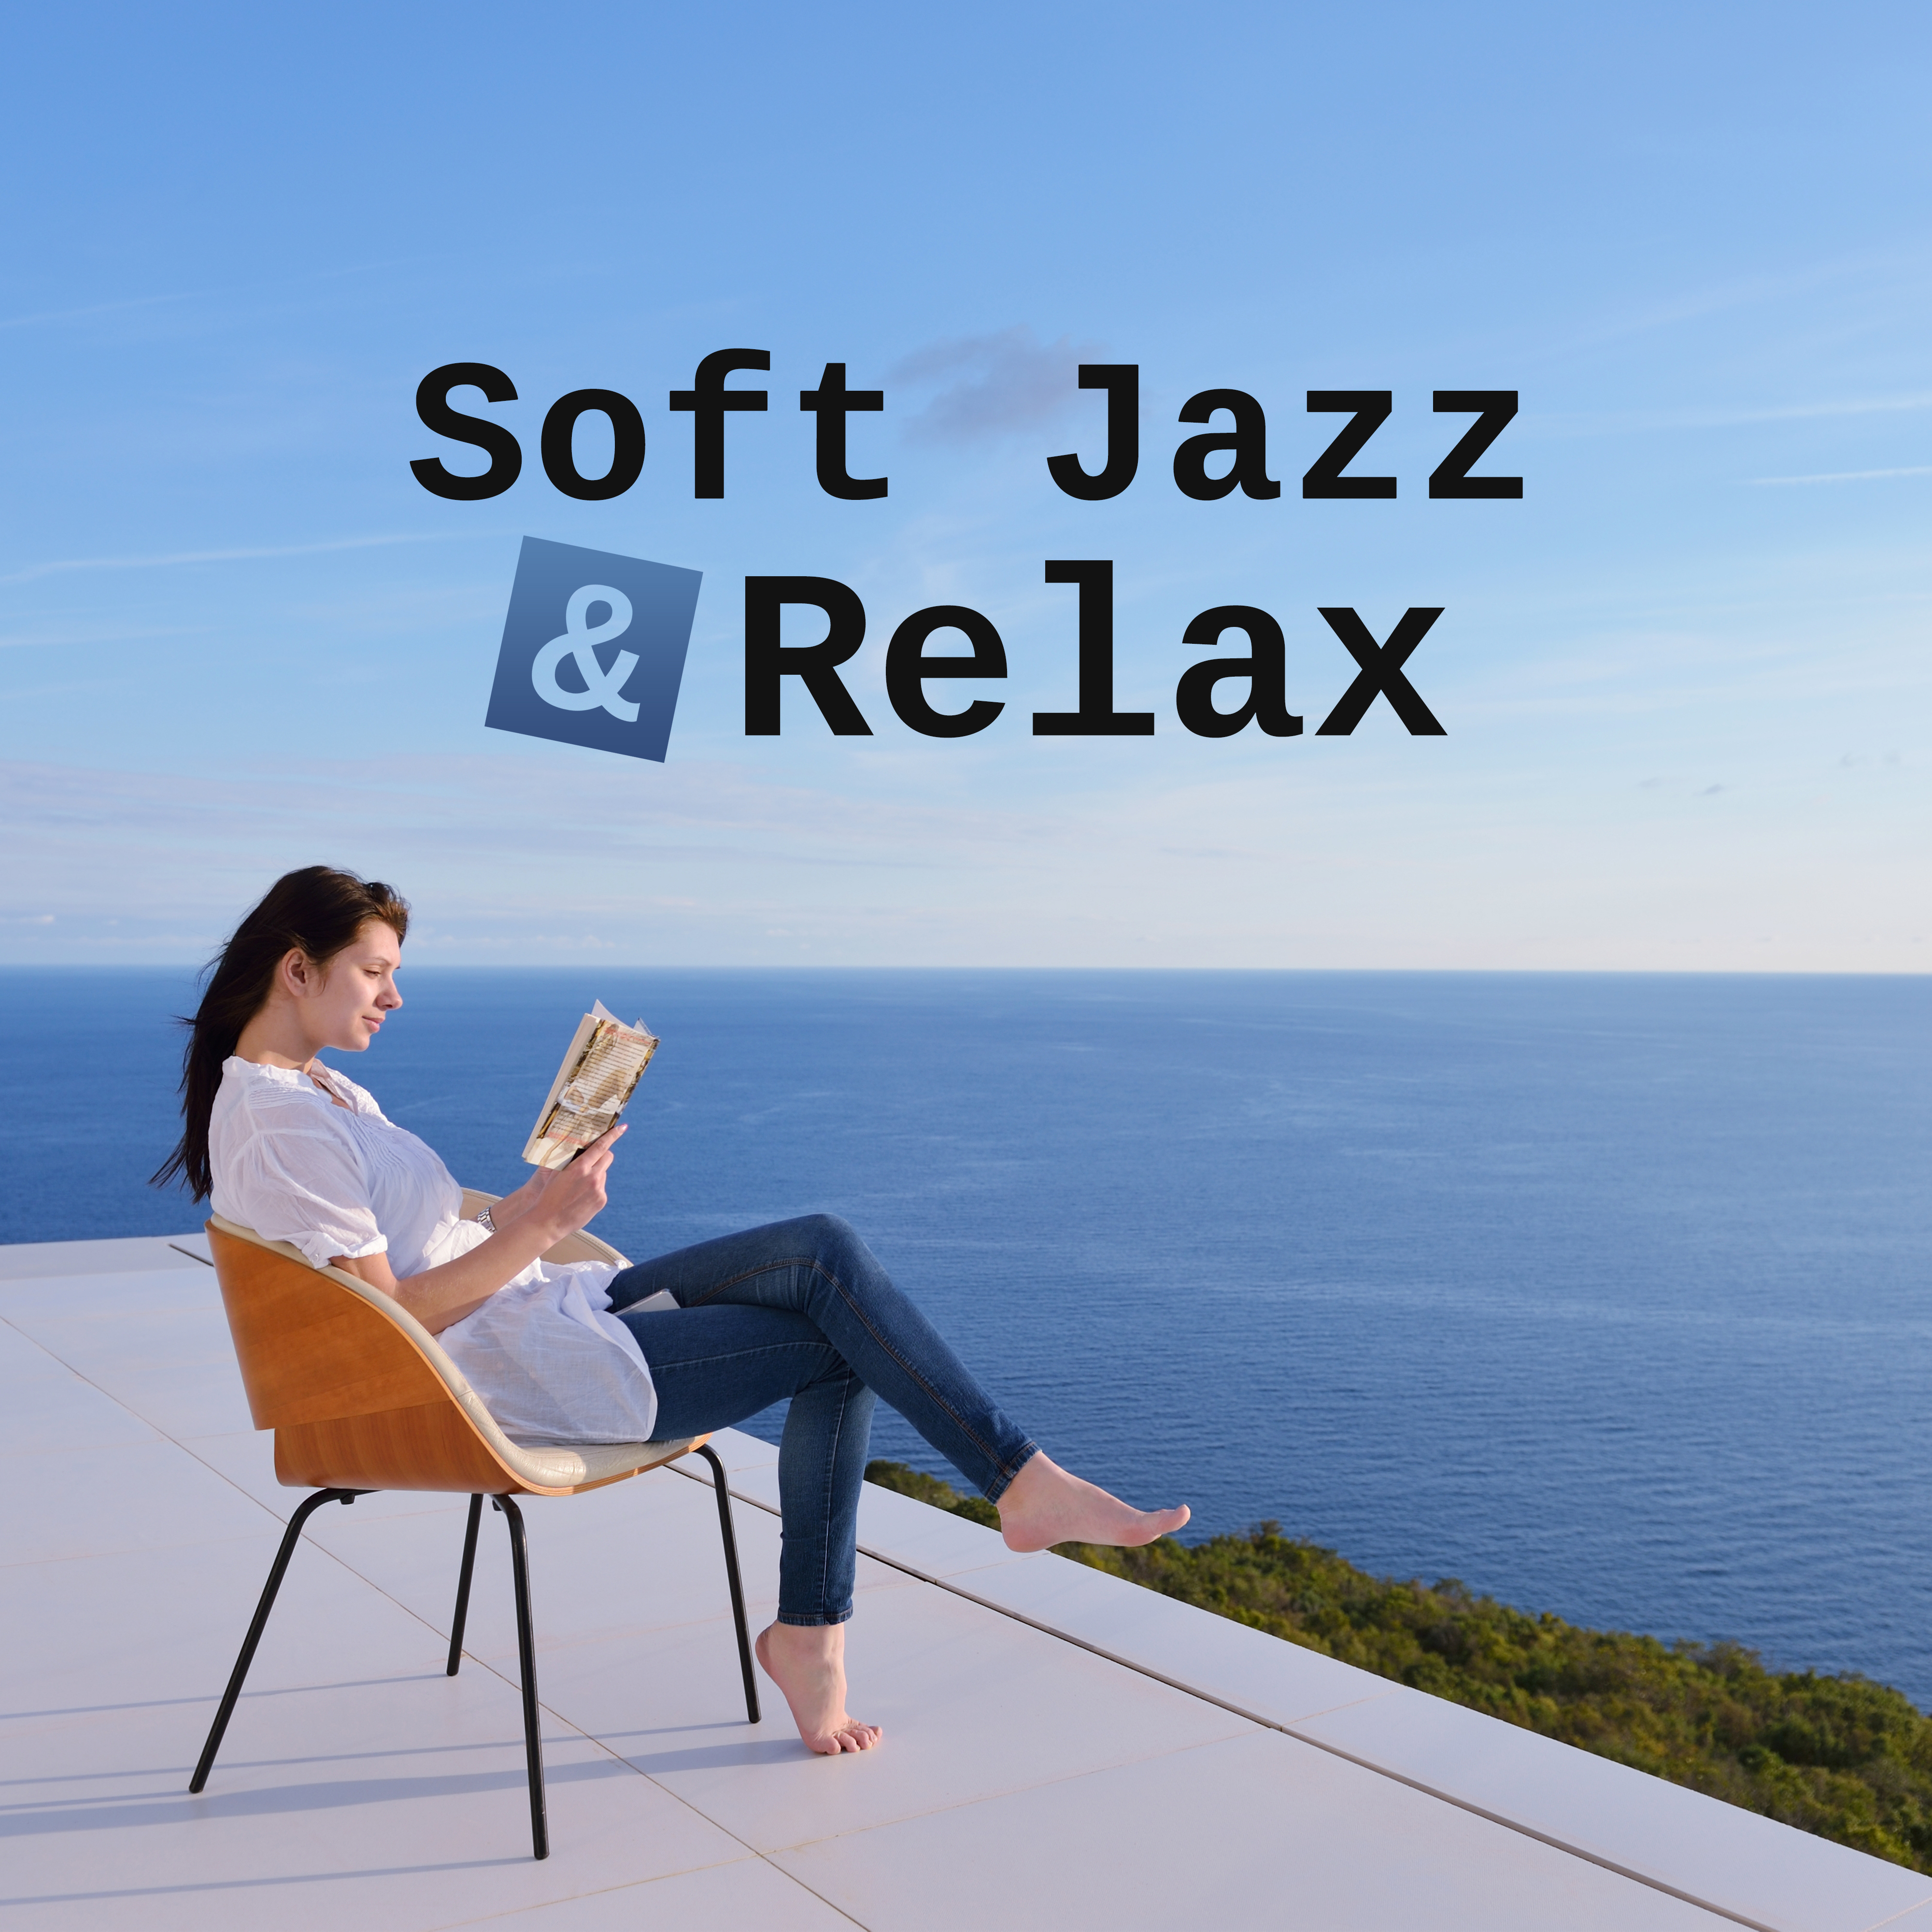 Soft Jazz & Relax – Pure Sleep, Calming Jazz to Rest, Soothing Piano Music, Instrumental Sounds to Calm Down, Peaceful Jazz